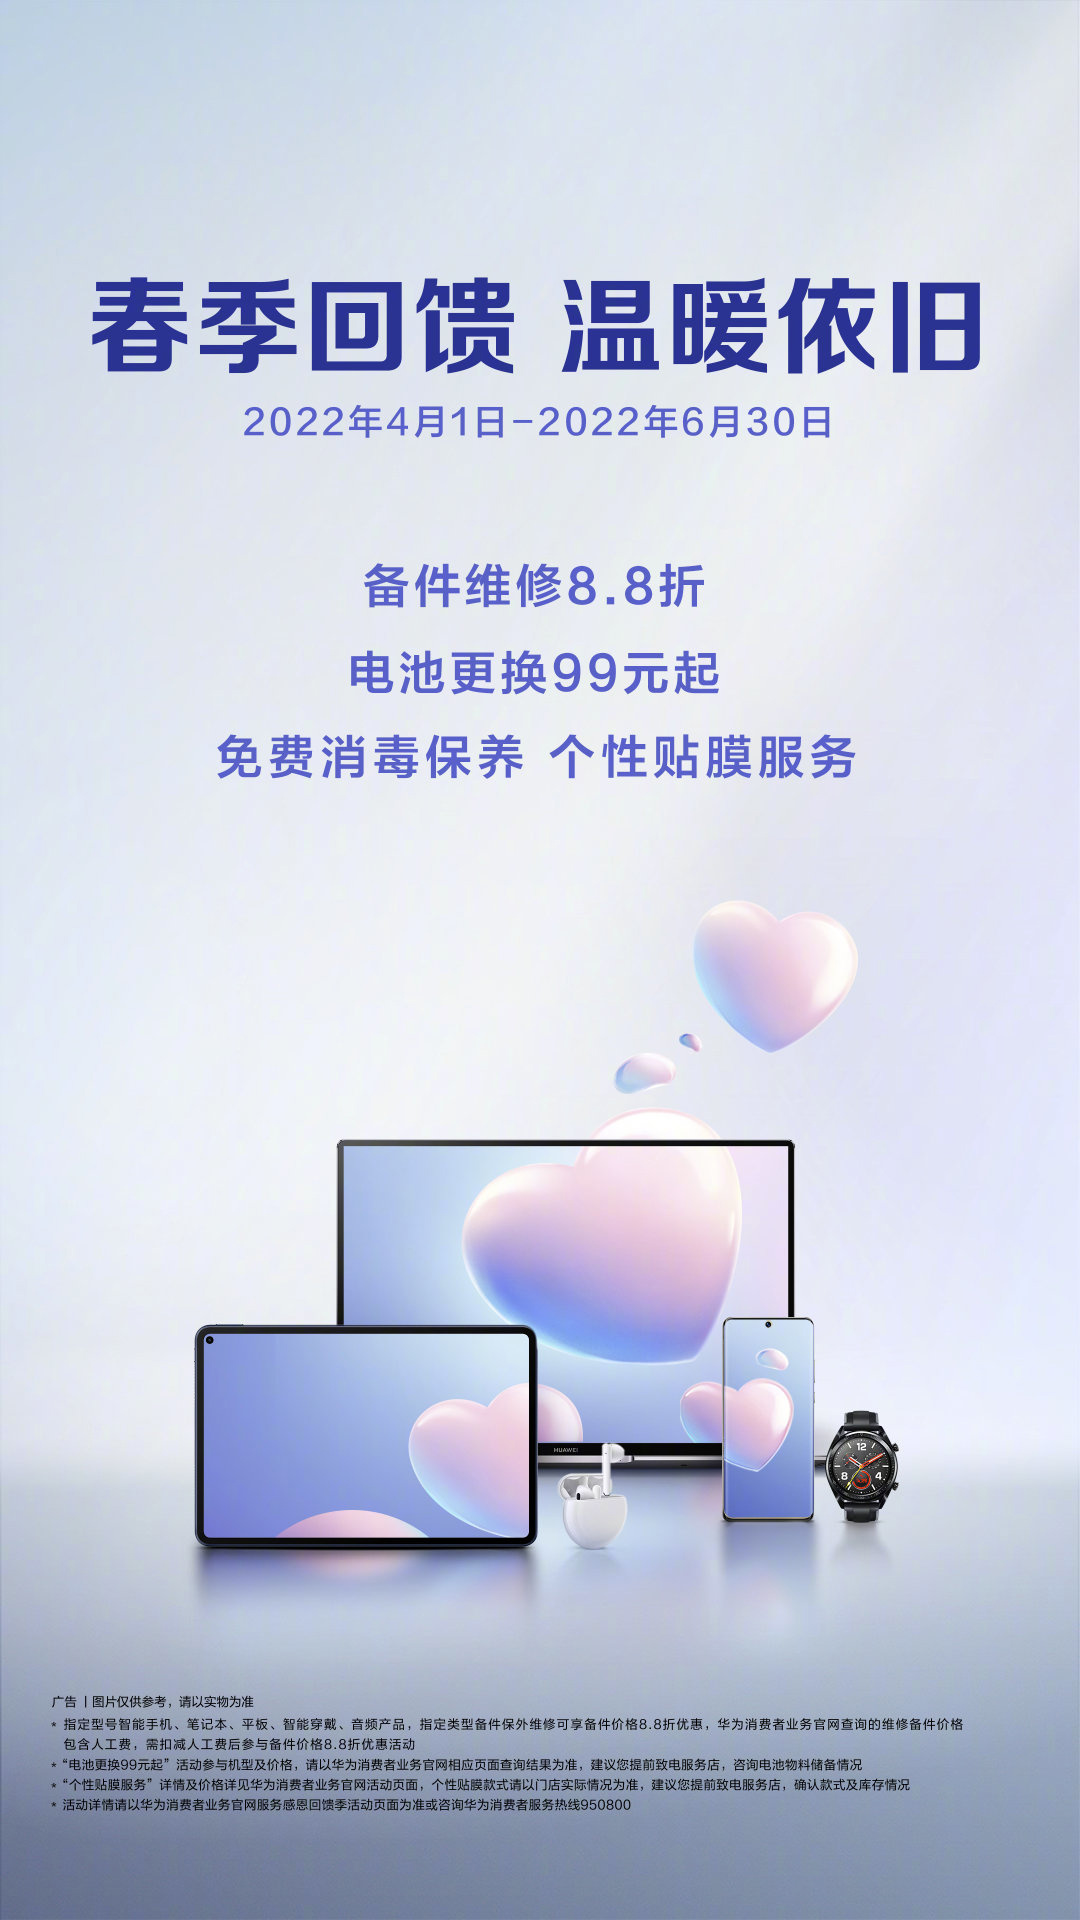 Huawei battery replacement event